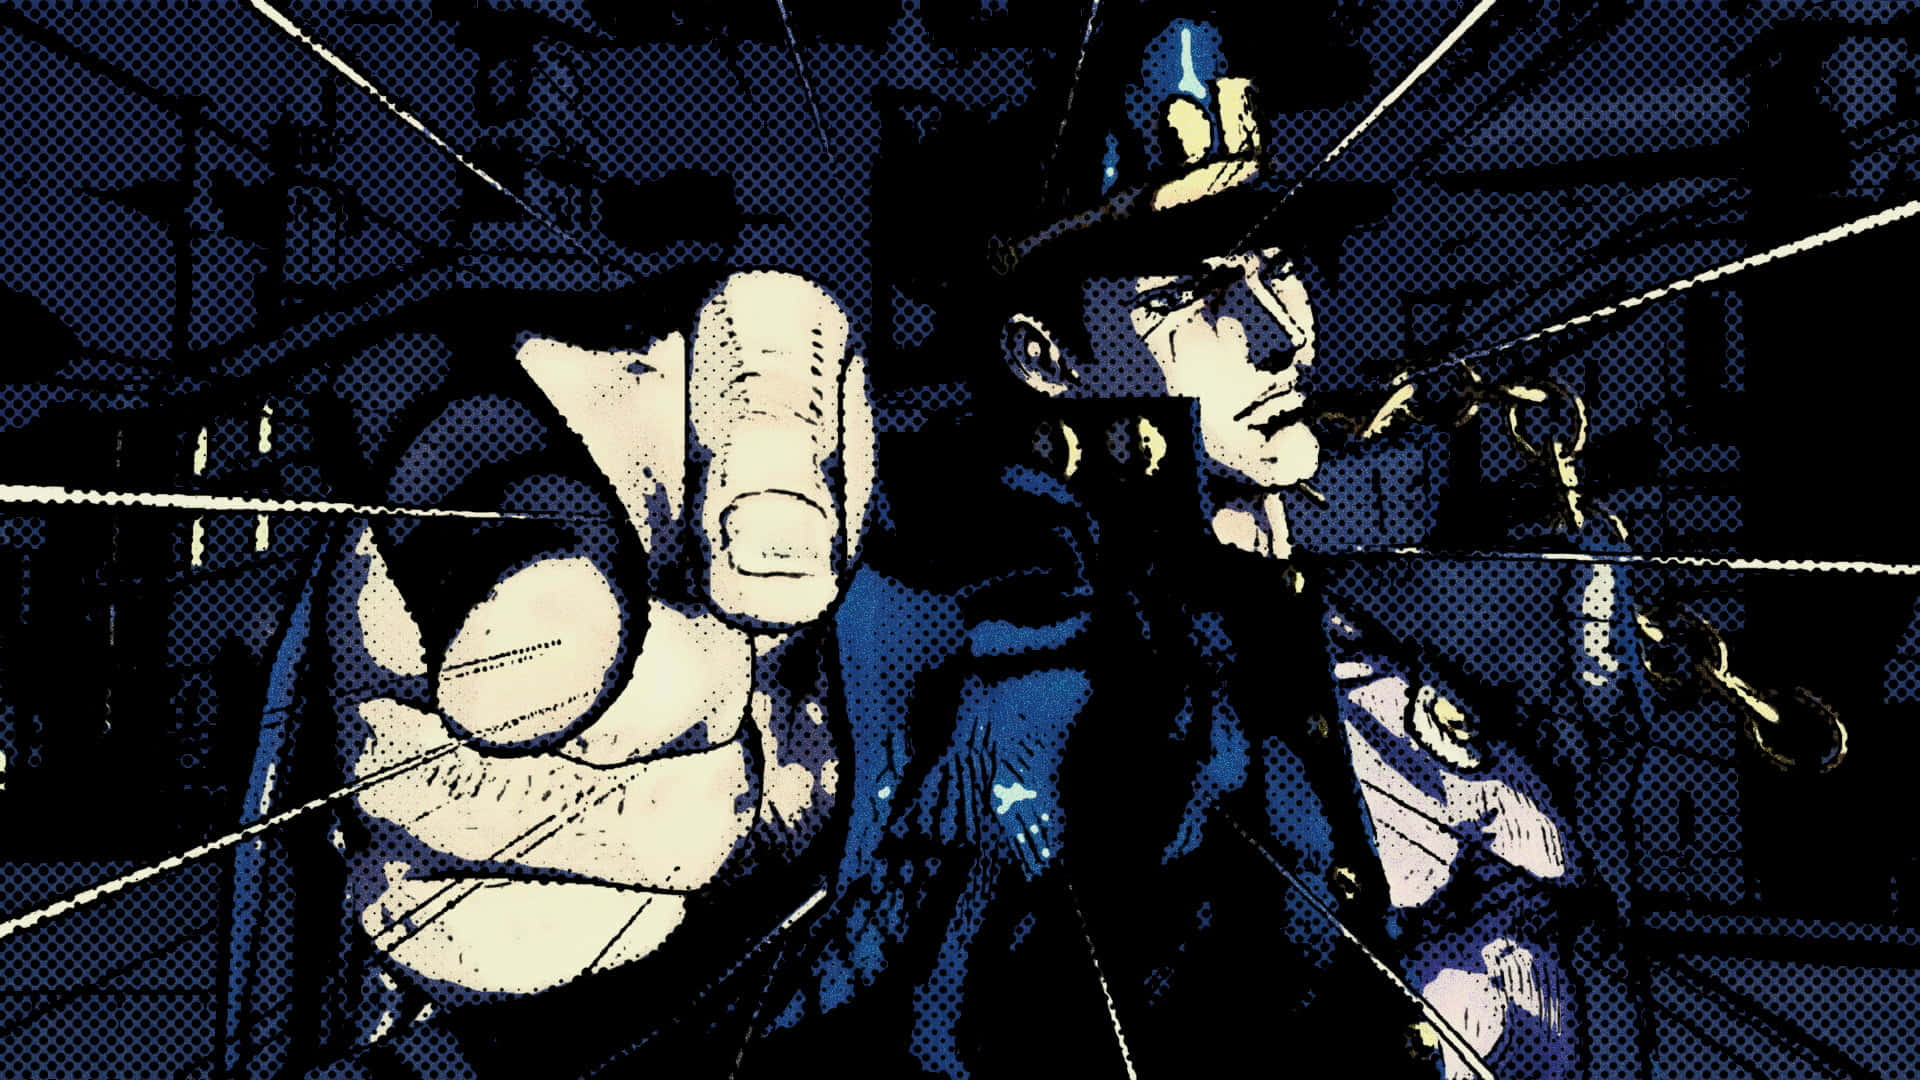 Jotaro Kujo strikes a pose in his iconic outfit standing against a striking night cityscape. Wallpaper